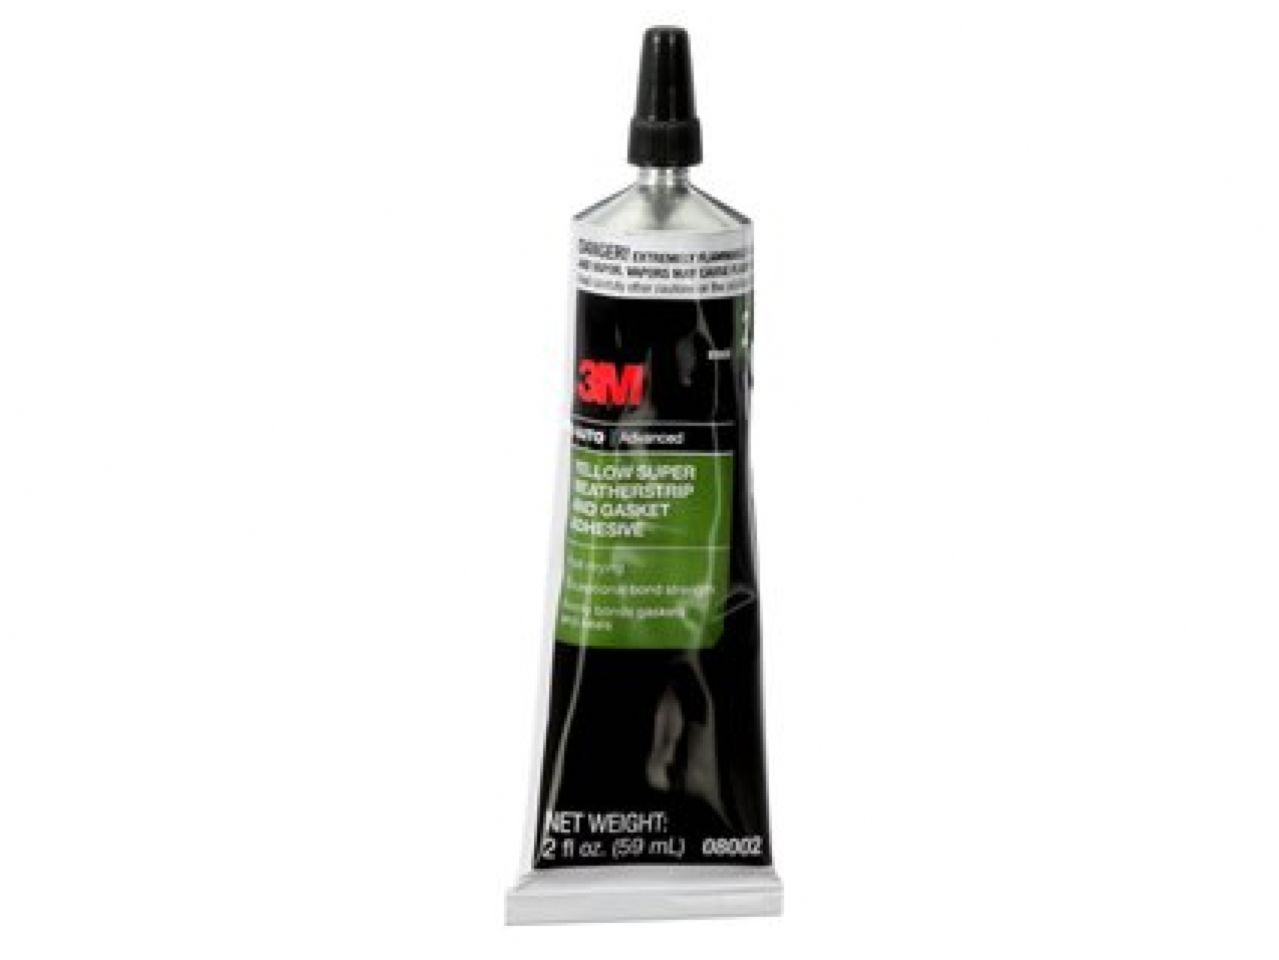 3M Super Weatherstrip And Gasket Adhesive, Yellow, 5 Oz Tube